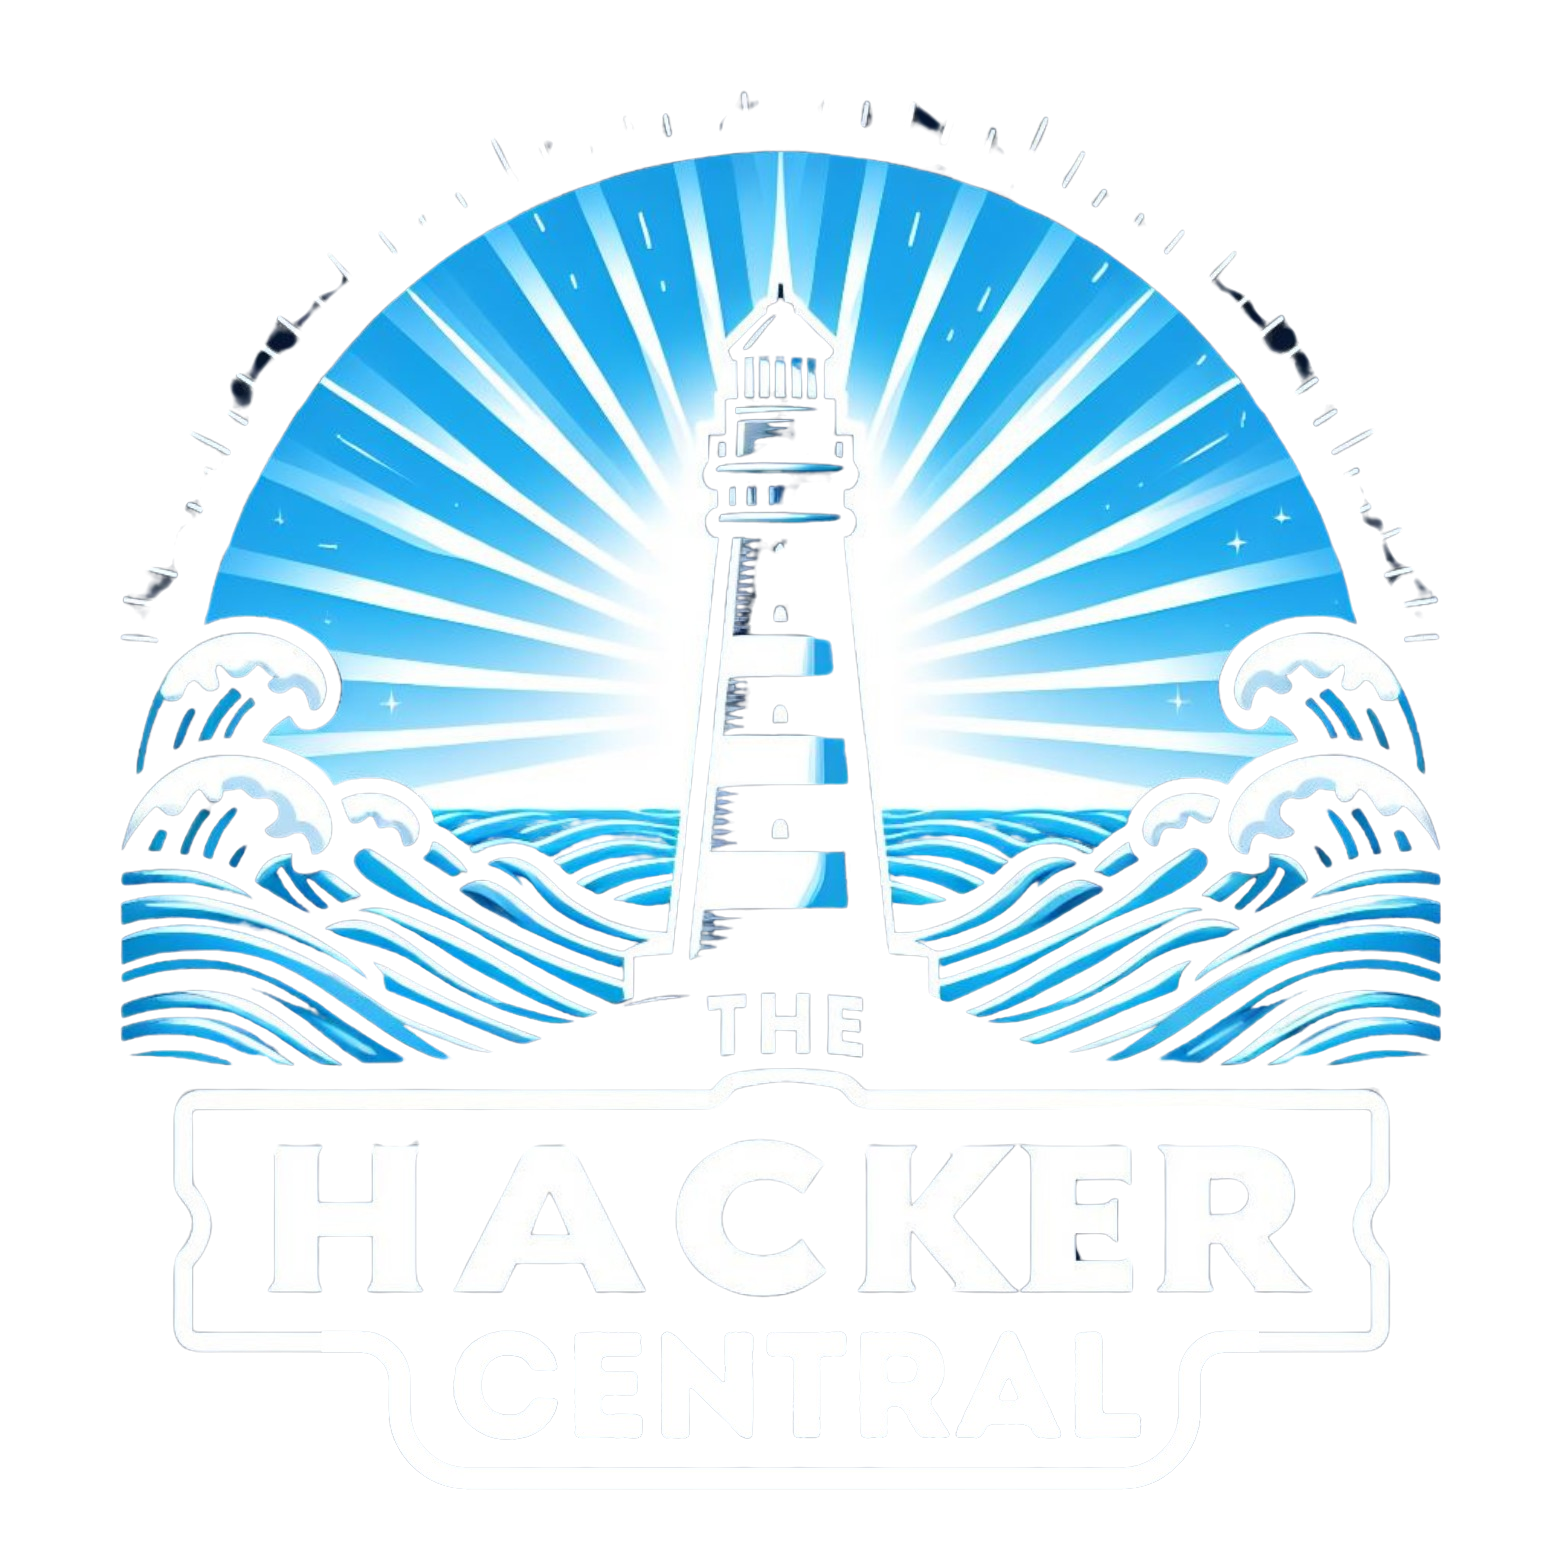 The Hacker Central